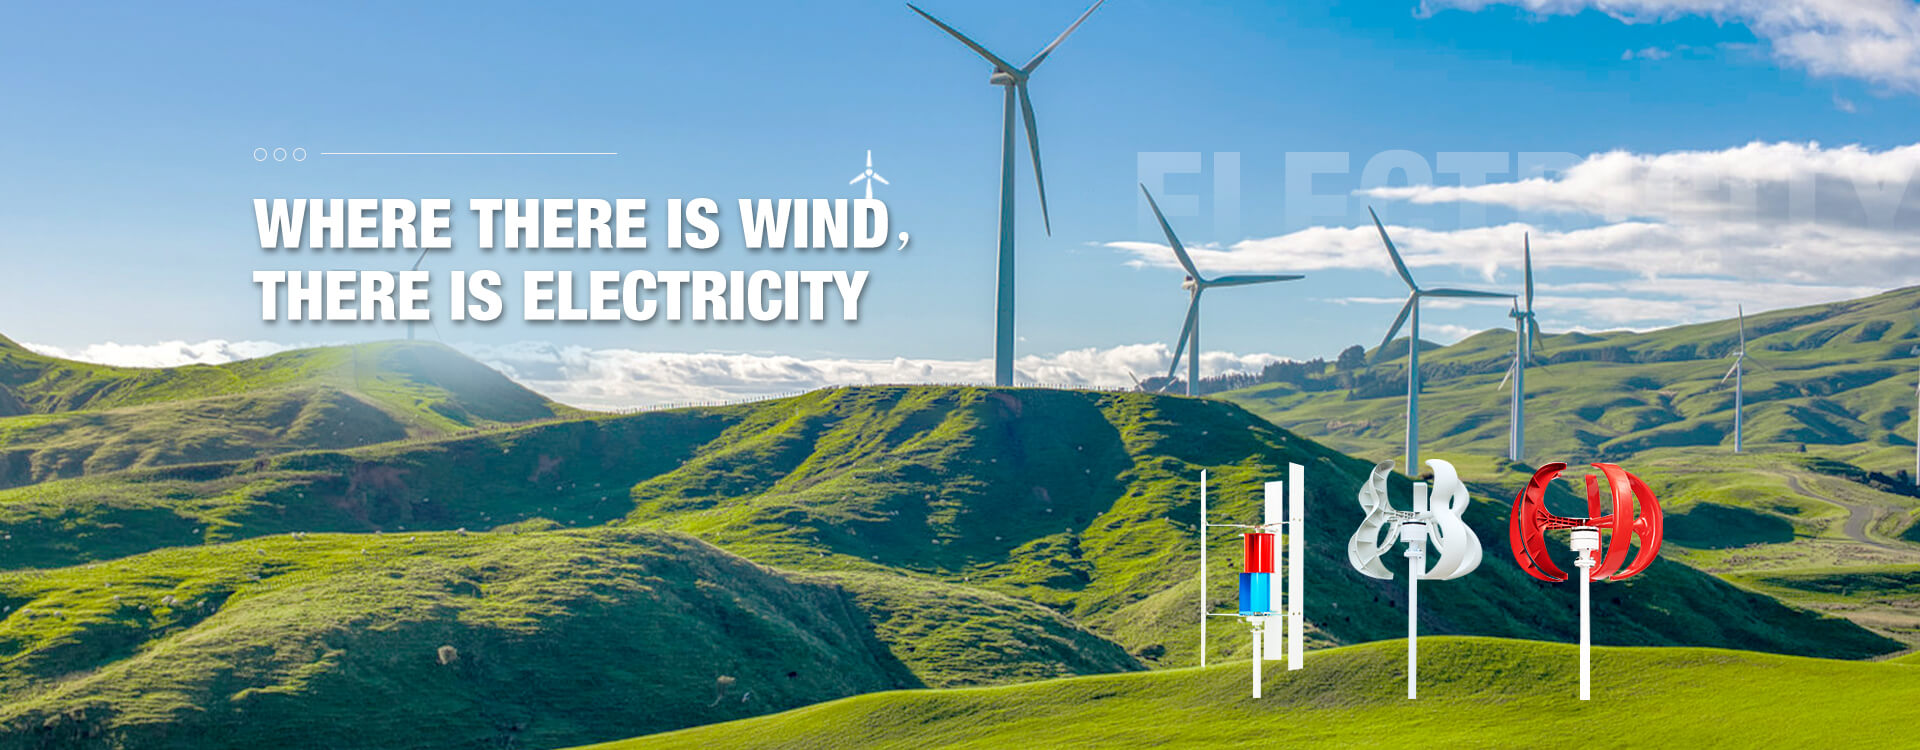 WHERE THERE IS WIND, THEREIS ELECTRICITY